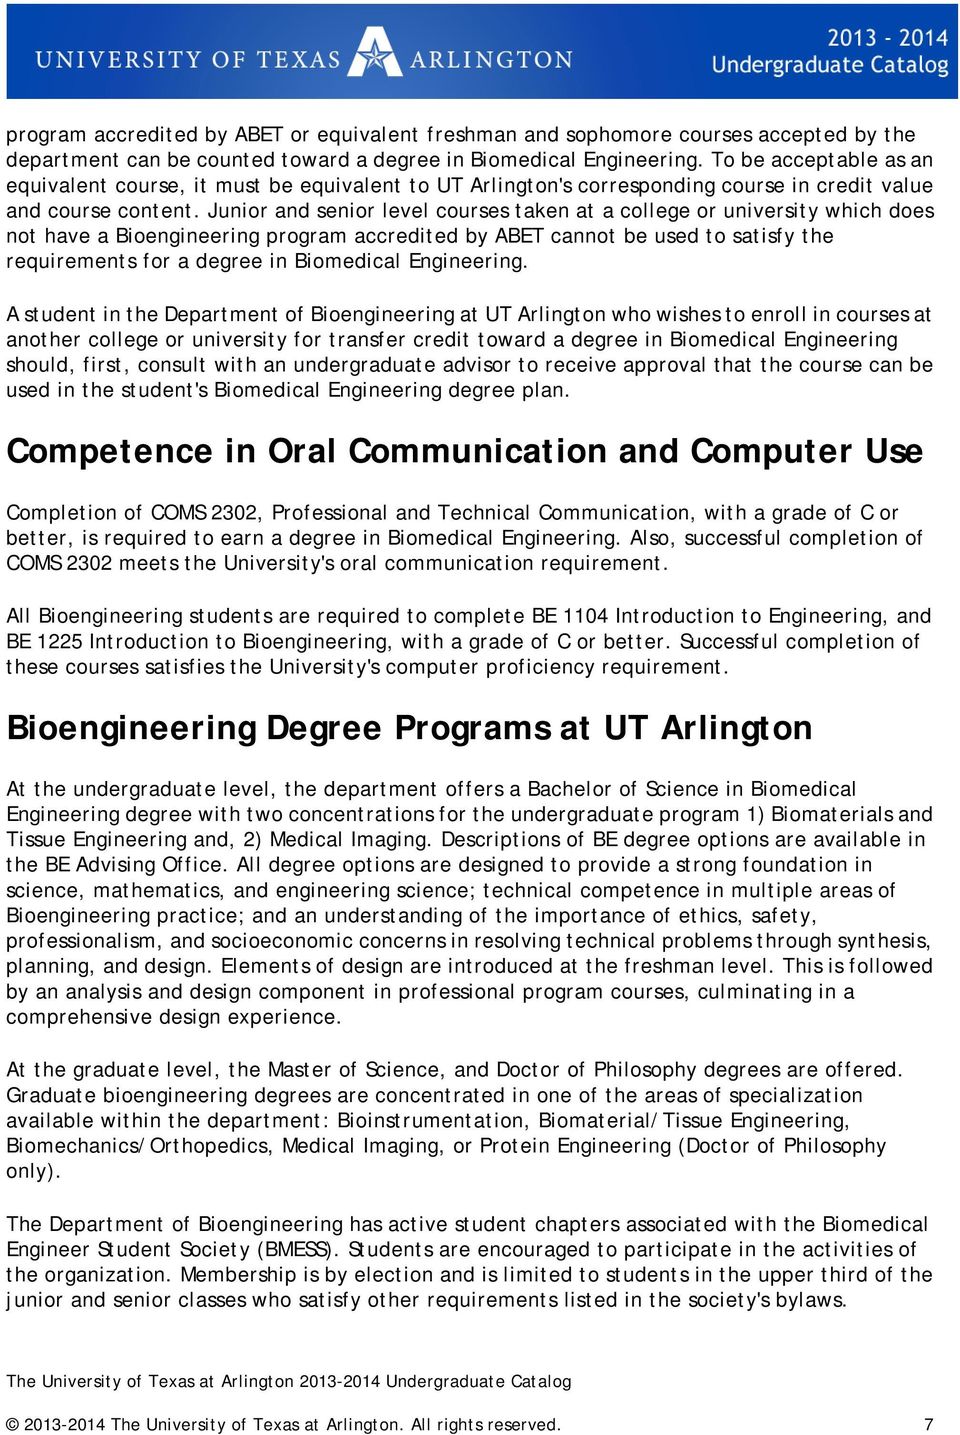 Junior and senior level courses taken at a college or university which does not have a Bioengineering program accredited by ABET cannot be used to satisfy the requirements for a degree in Biomedical